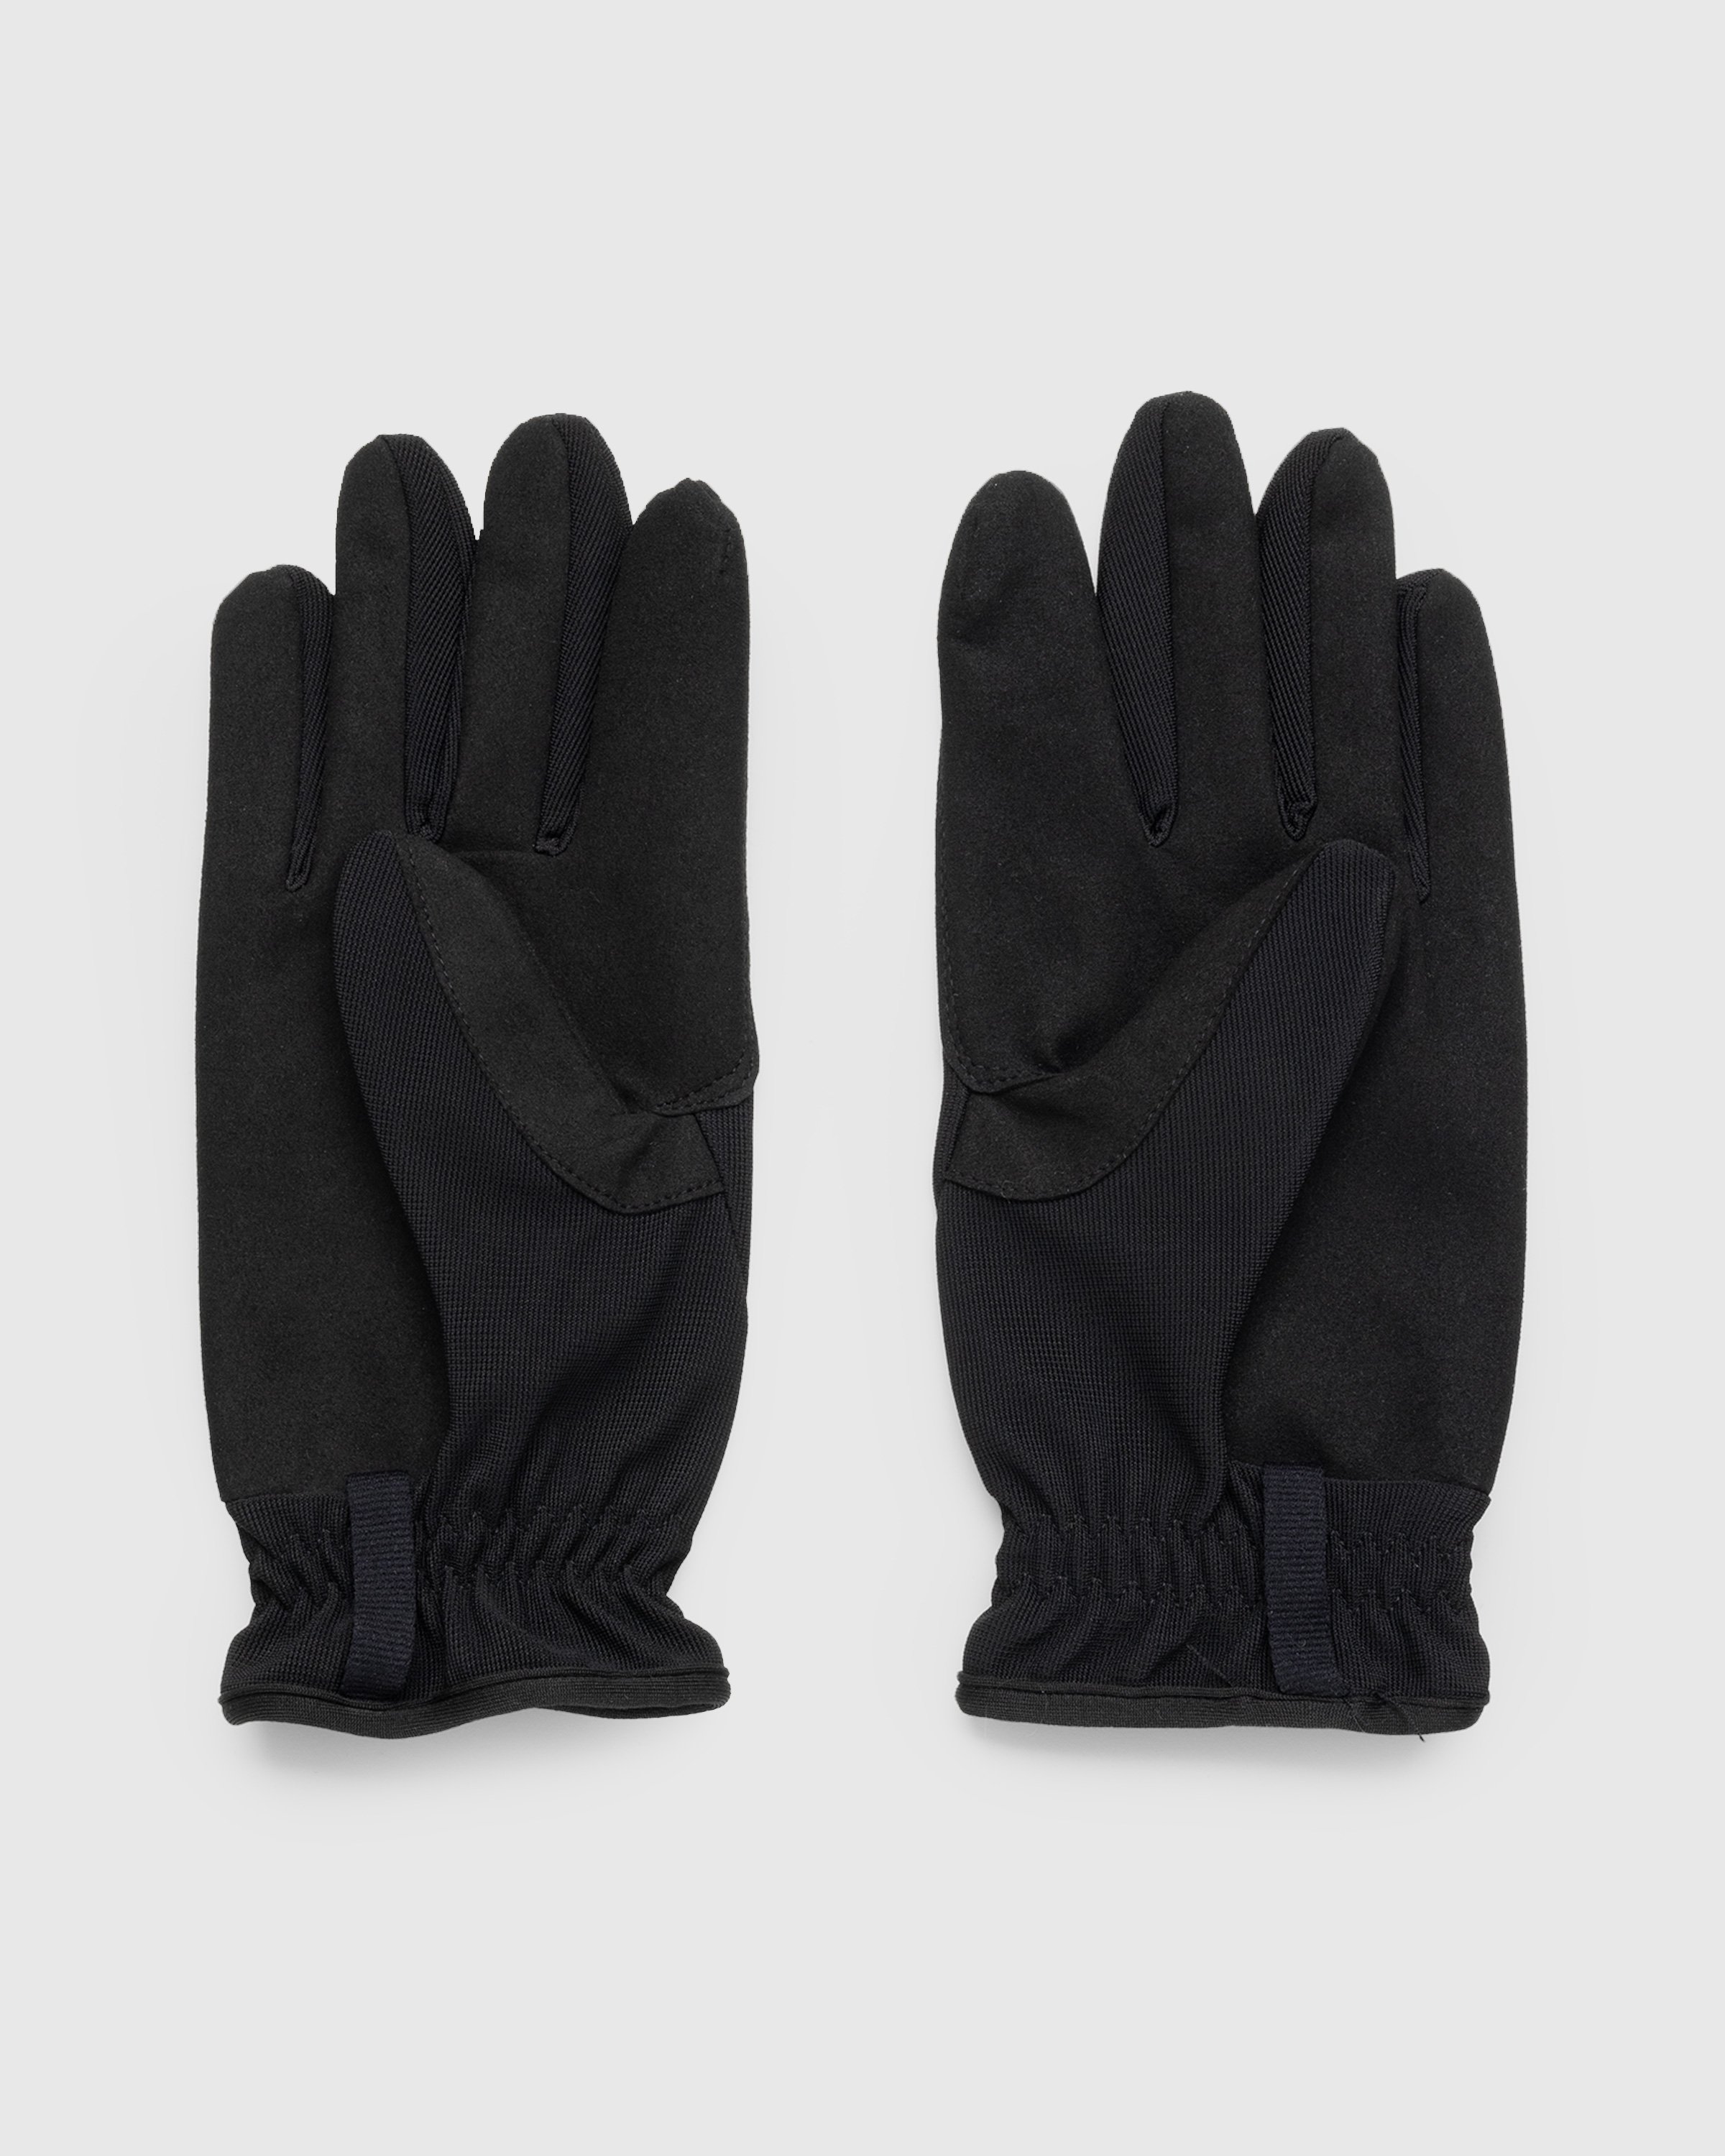 null - Technical Gloves Black - Accessories - Black - Image 2